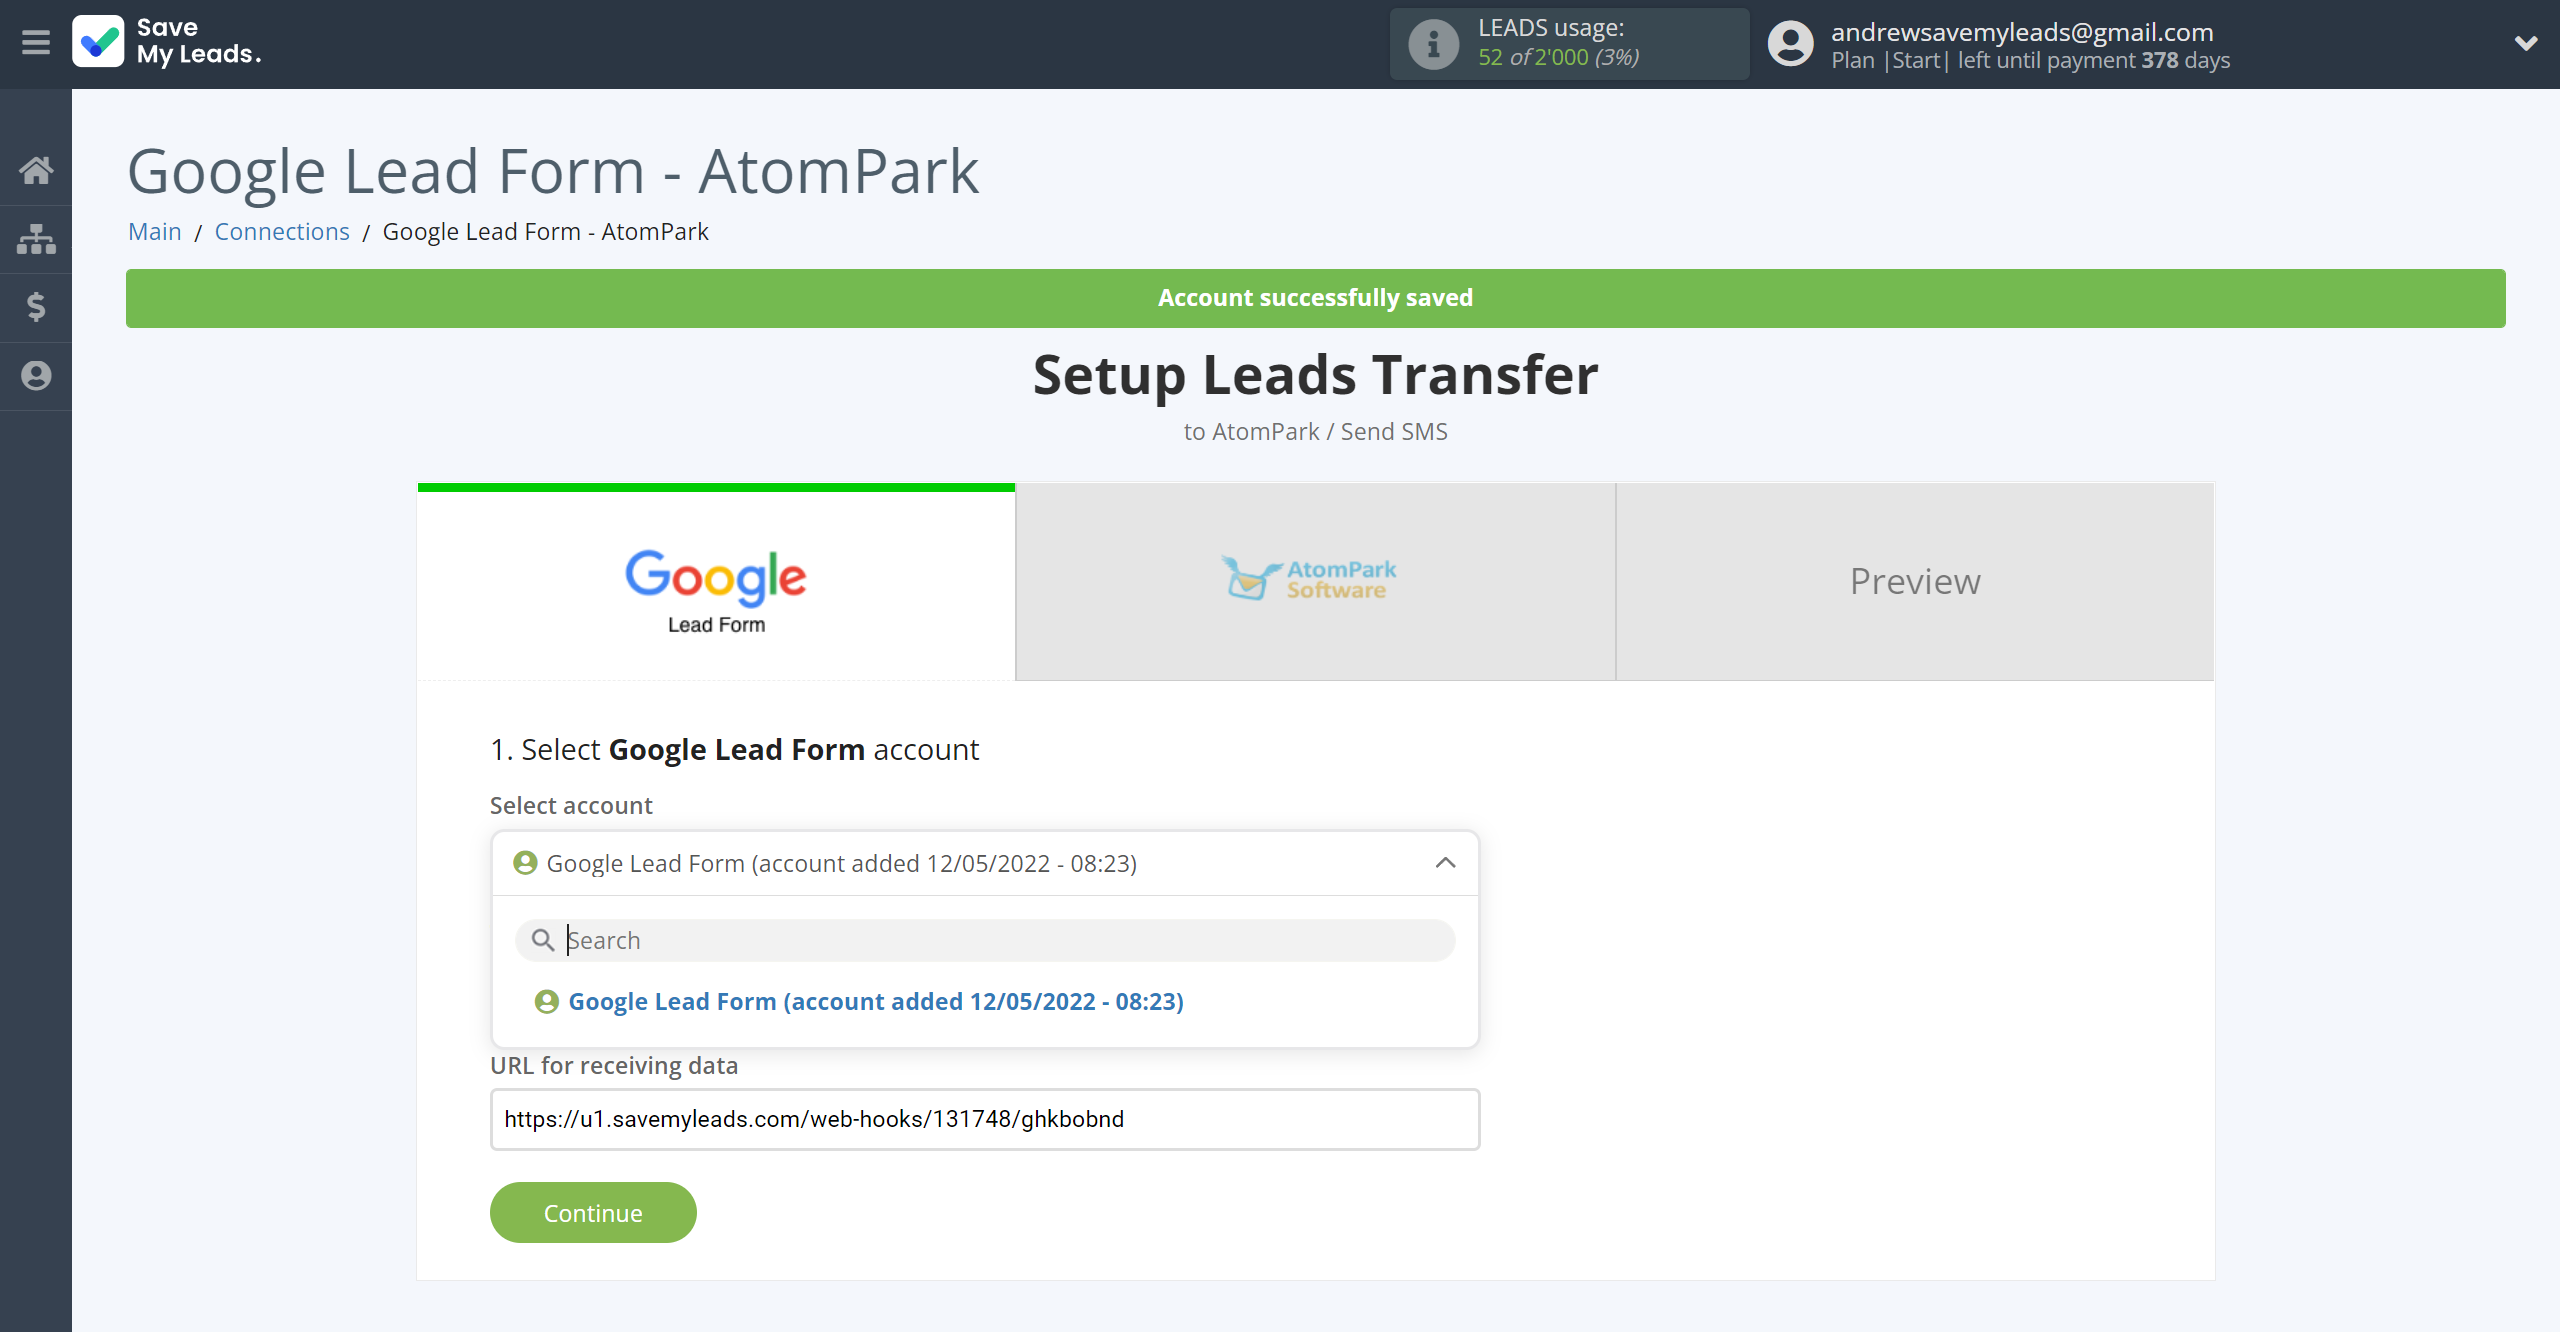 How to Connect Google Lead Form with AtomPark | Data Source account selection